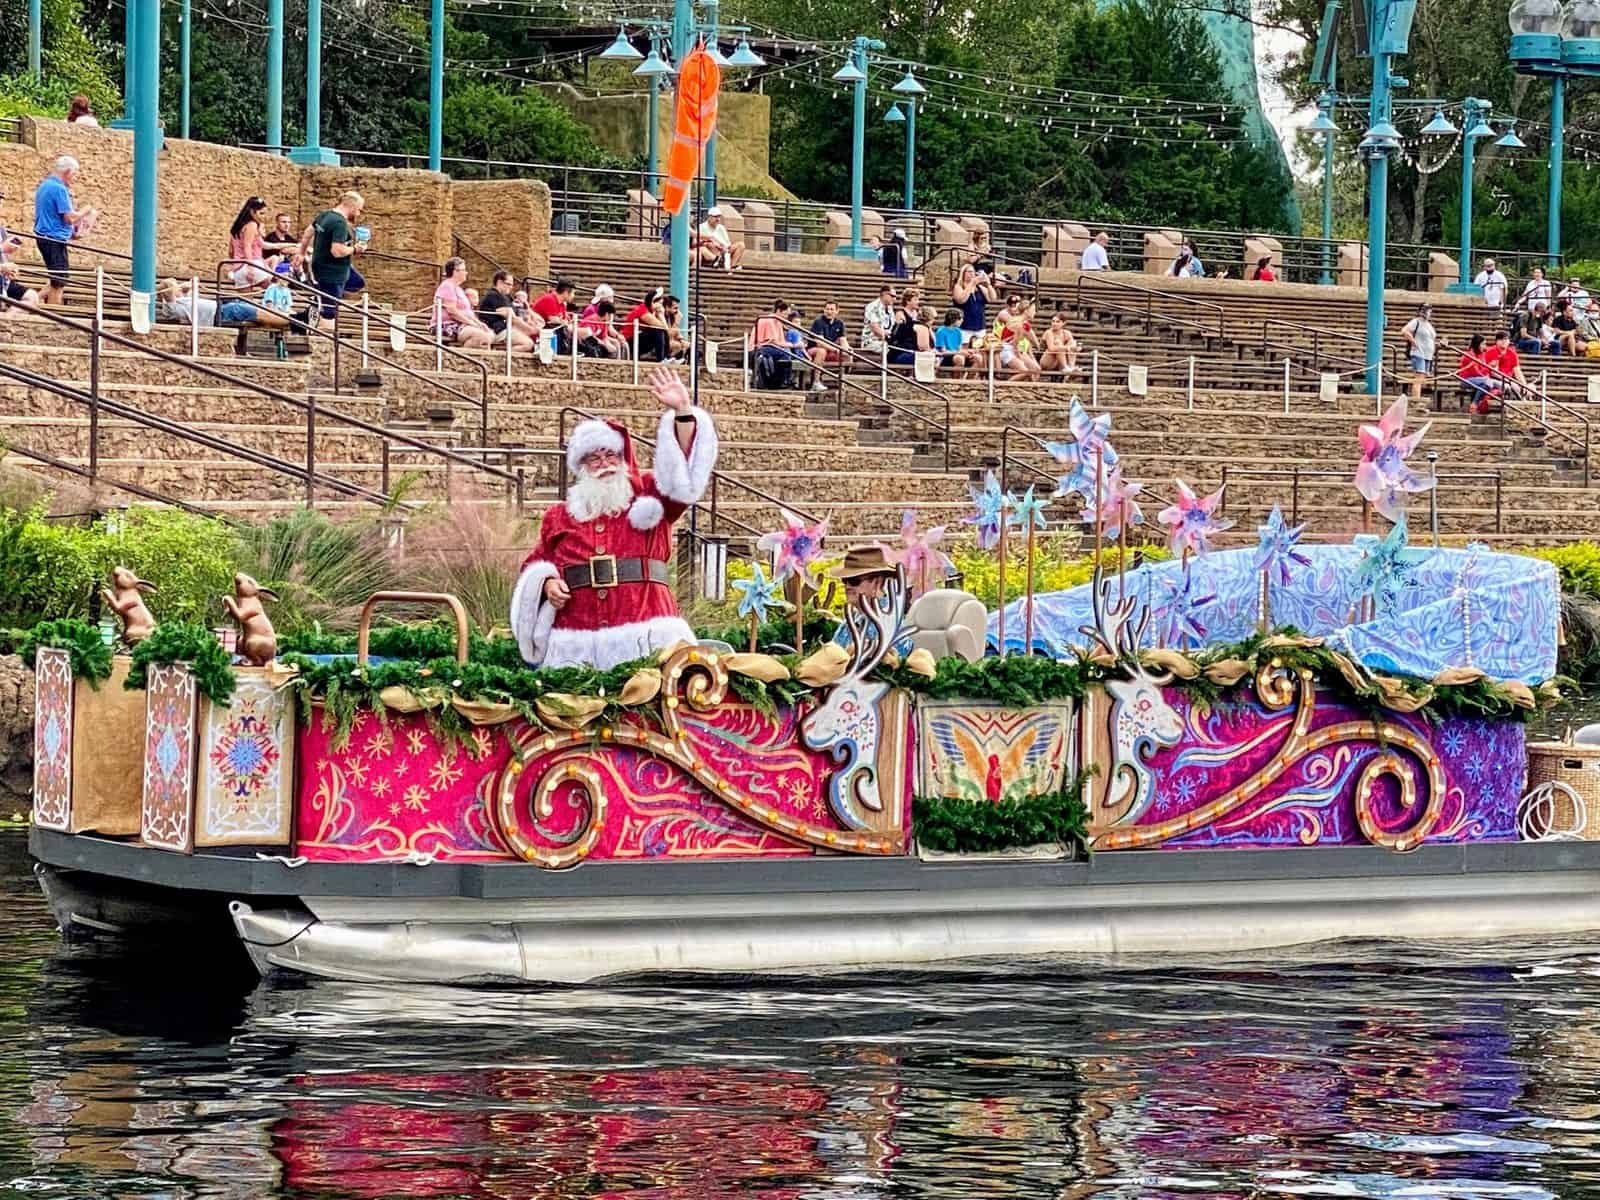 Where To Find Santa Claus At Disney World For The 2022 Christmas Season